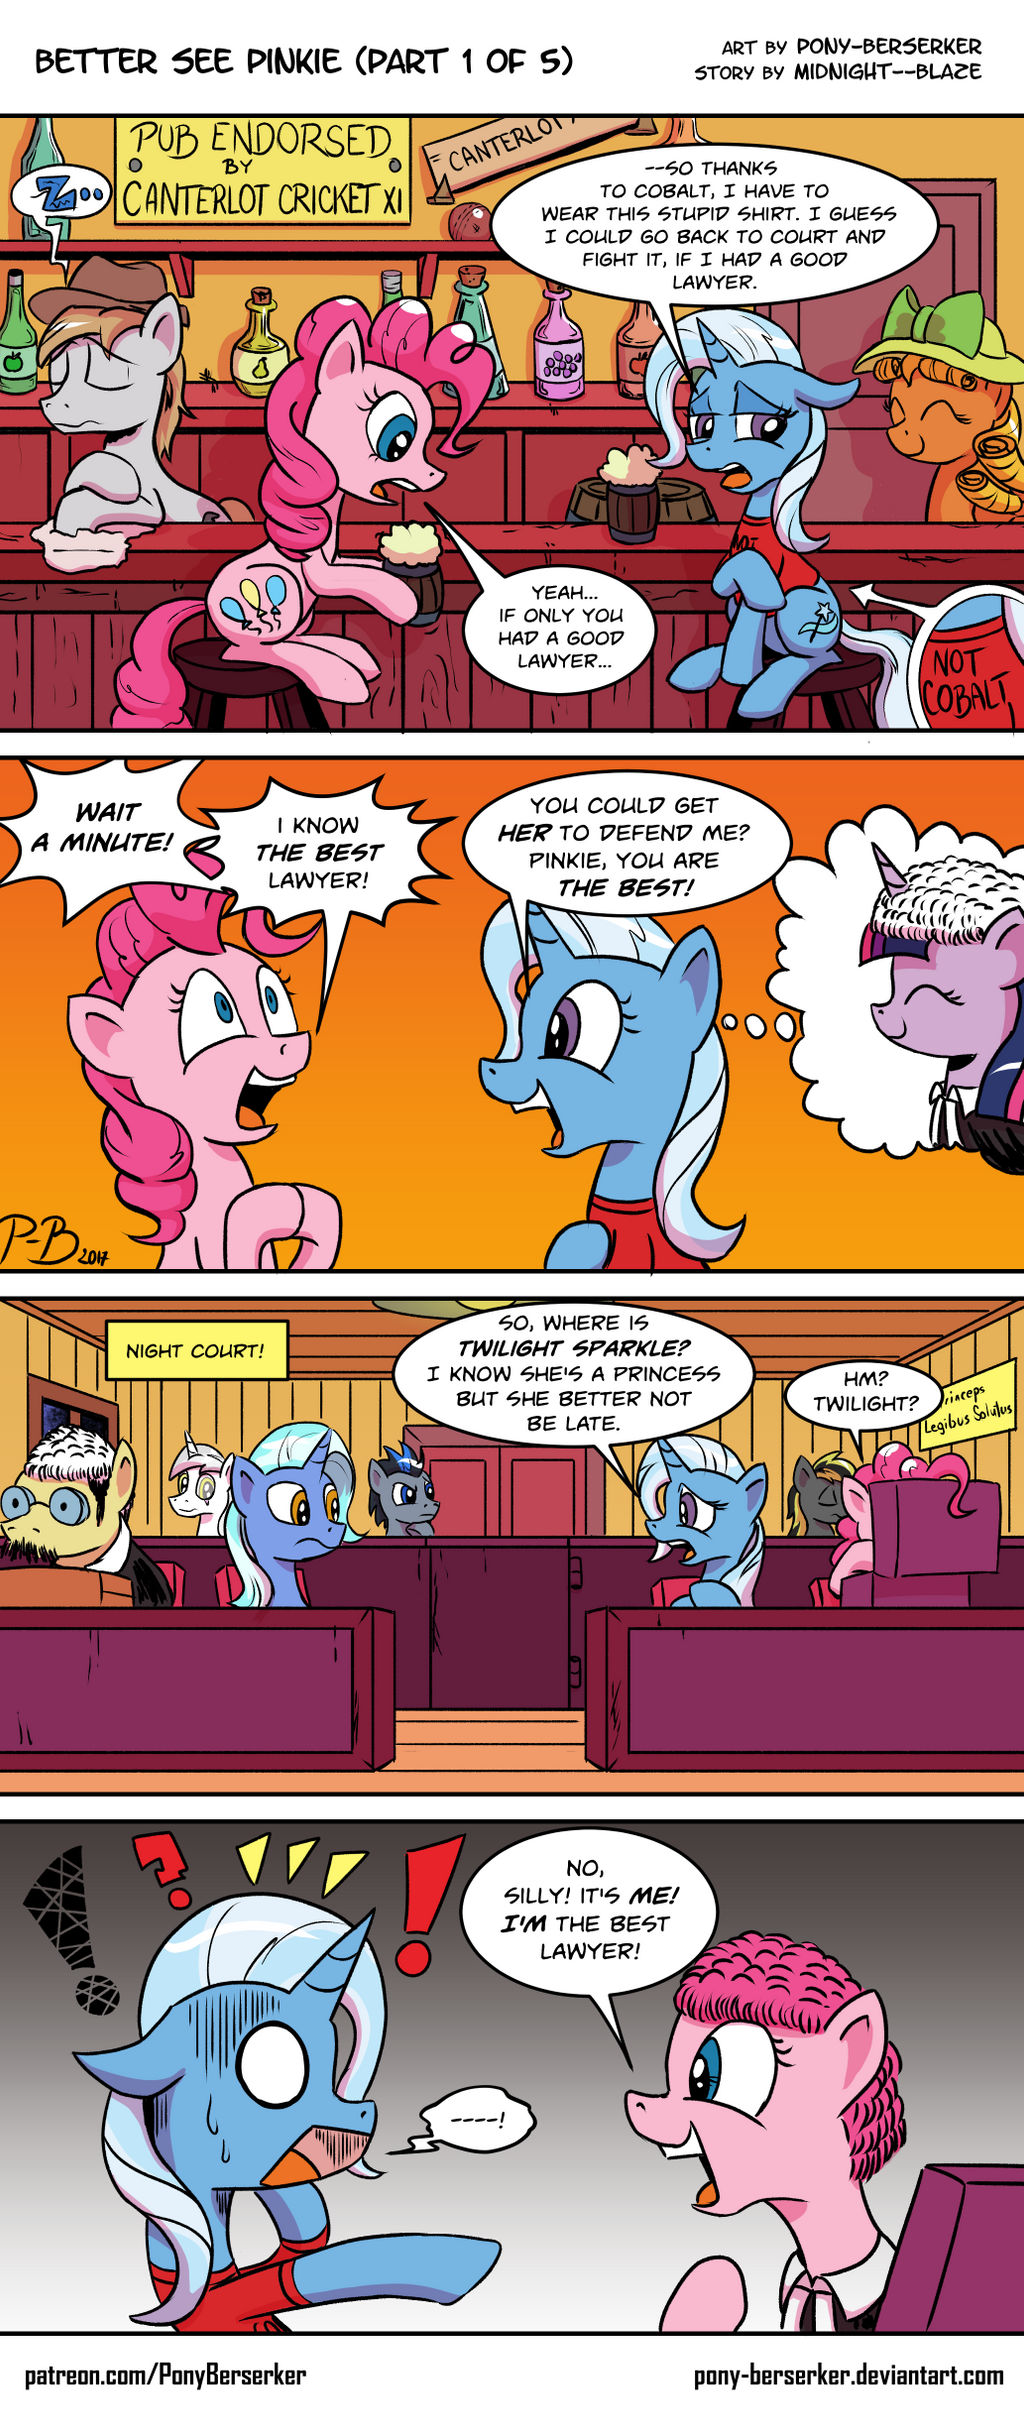 Better See Pinkie (part 1 of 5)